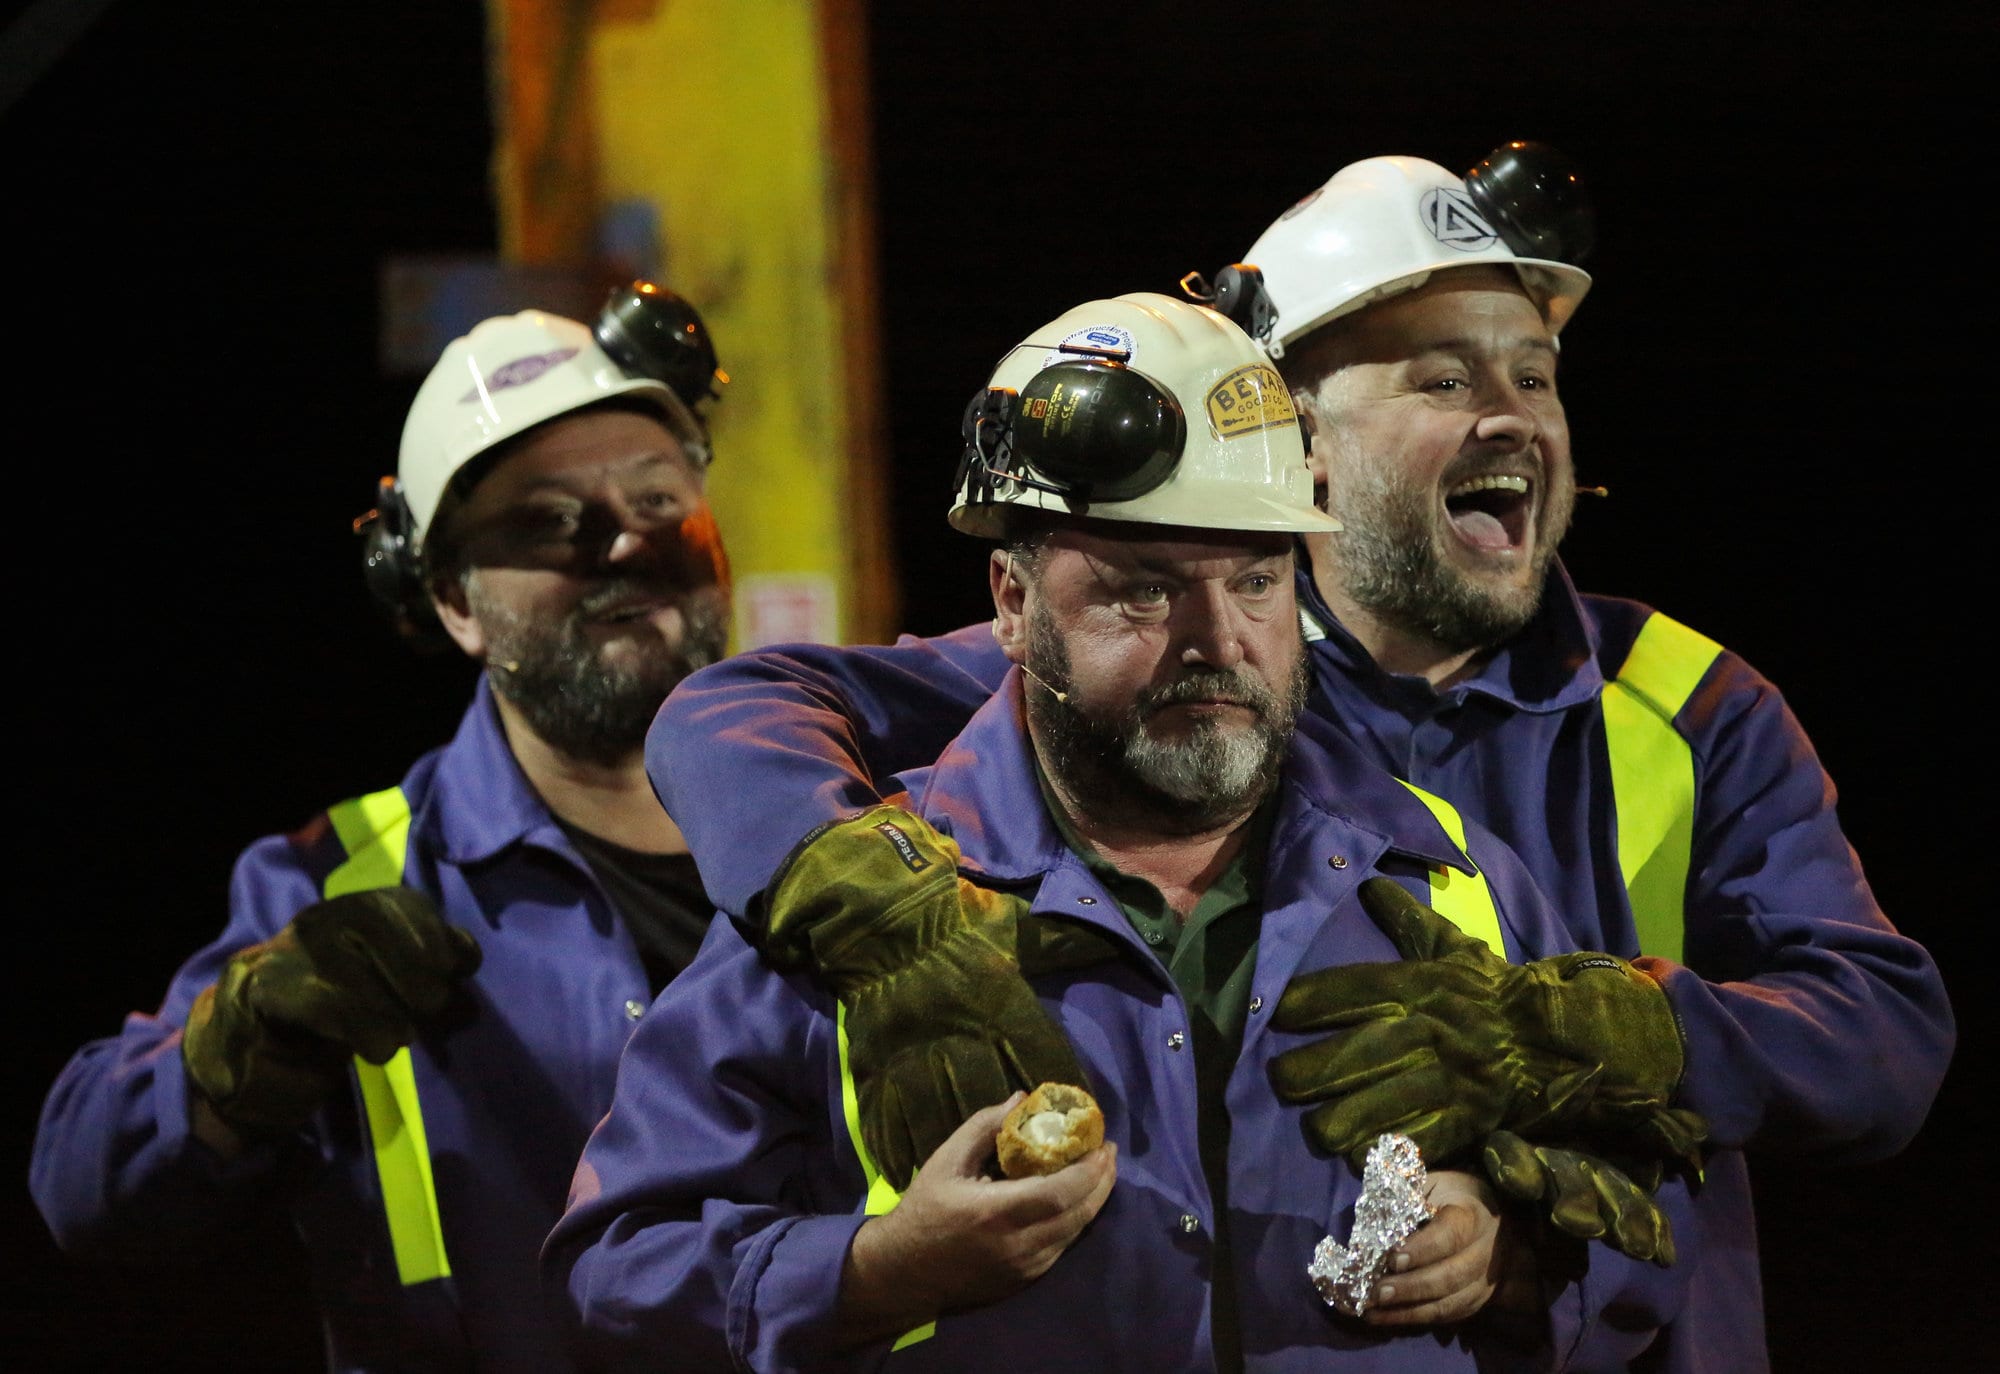 Pictured: Re: Dress rehearsal of "We'Re Still Here", a play created by Rachel Trezise, Common Wealth and the National Theatre Wales about steelworkers, which will be performed in Byass Works, a disused industrial unit, in Port Talbot, south Wales, UK.